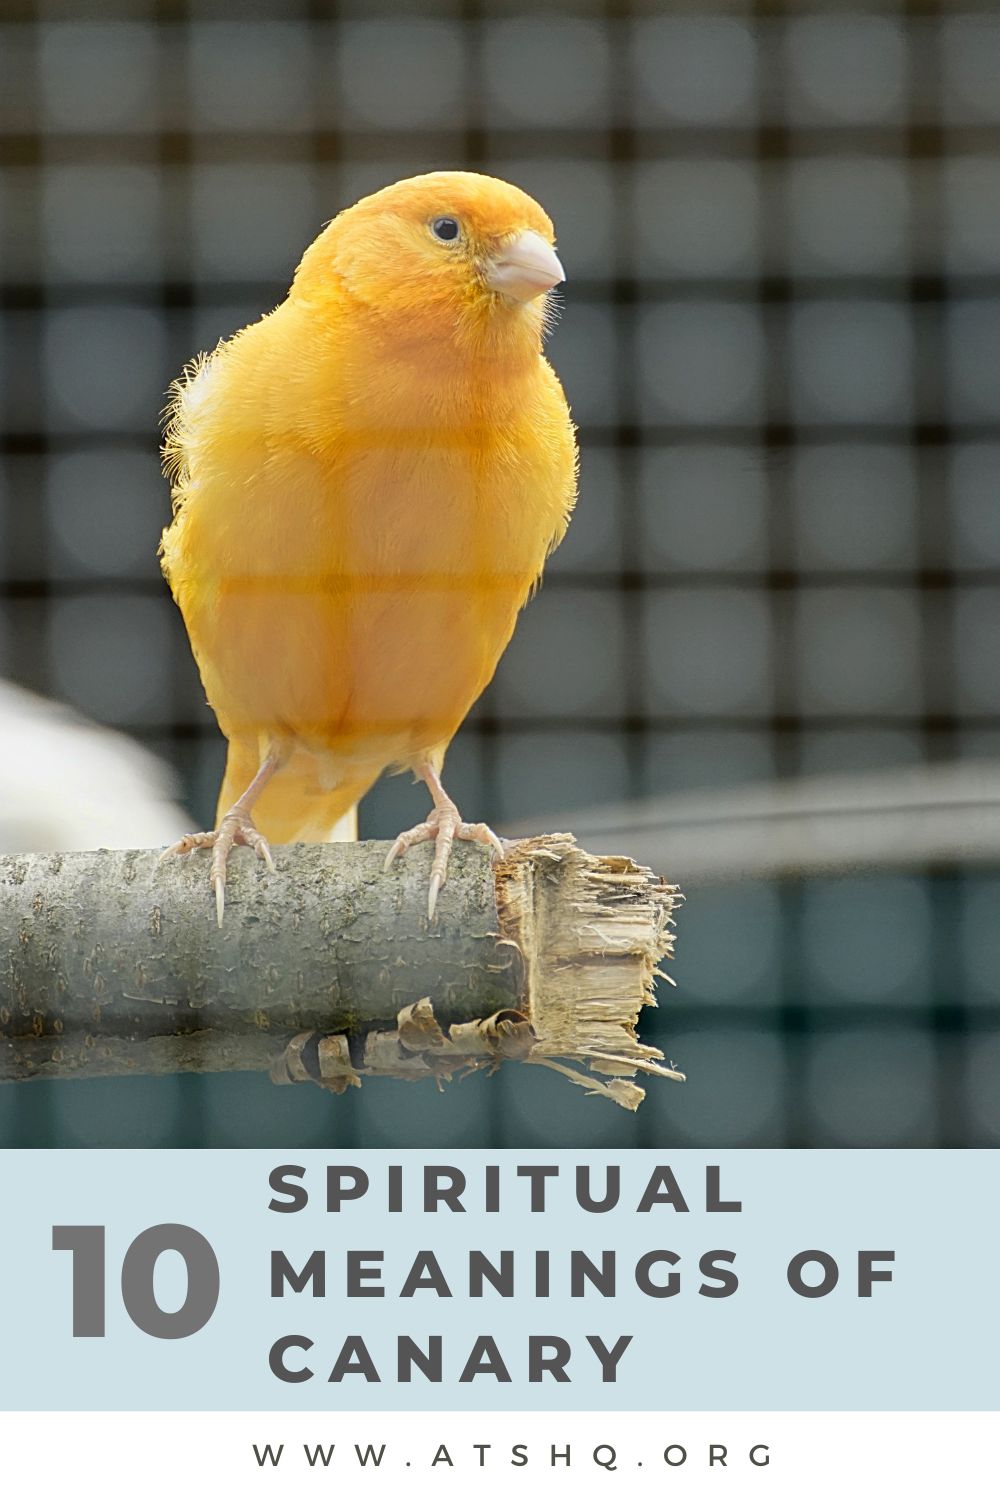 10 Spiritual Meanings of Canary